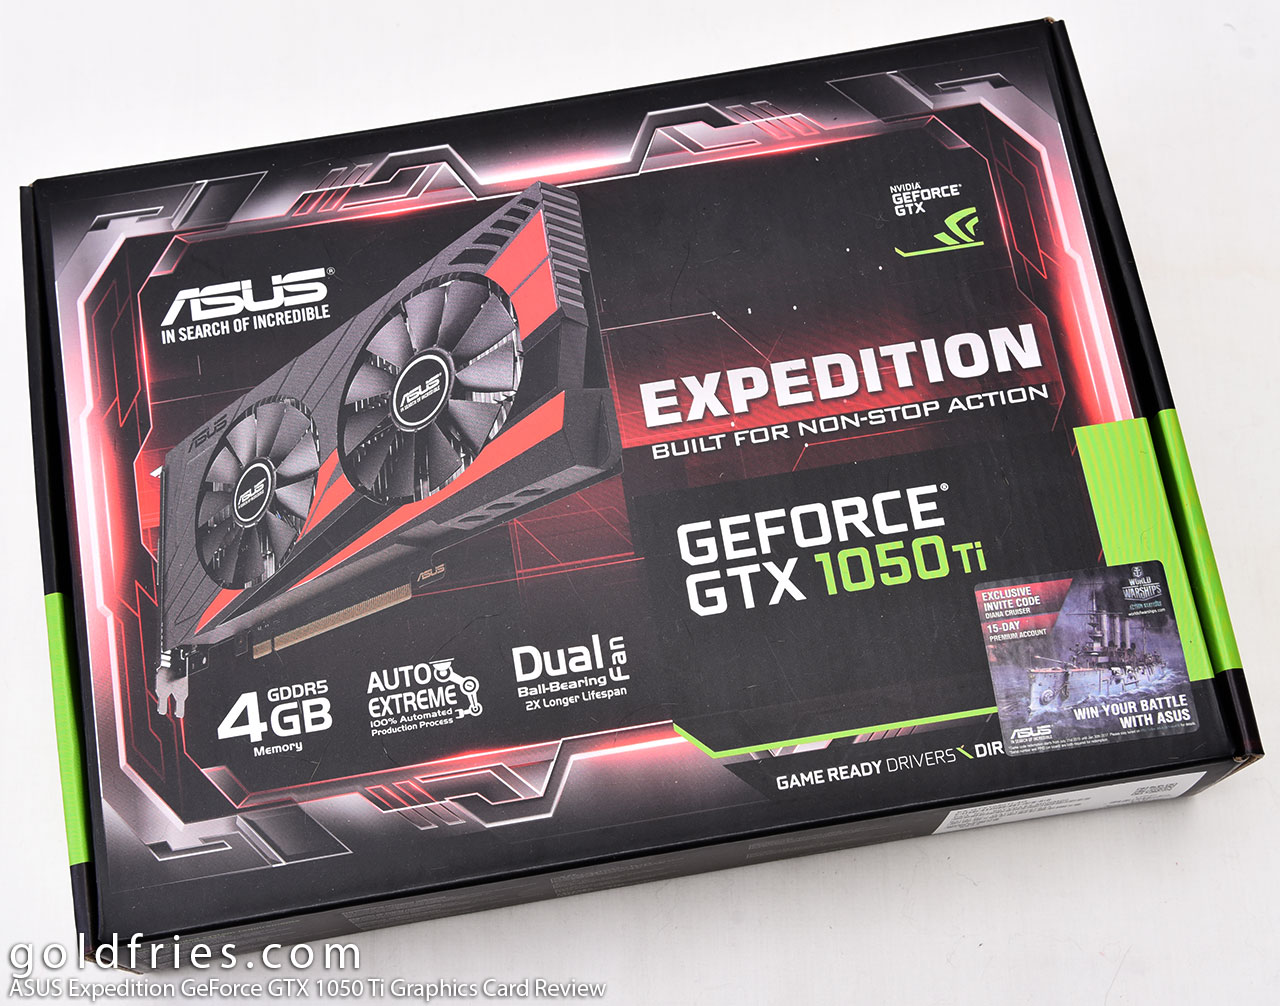 ASUS Expedition GeForce GTX 1050 Ti Graphics Card Review